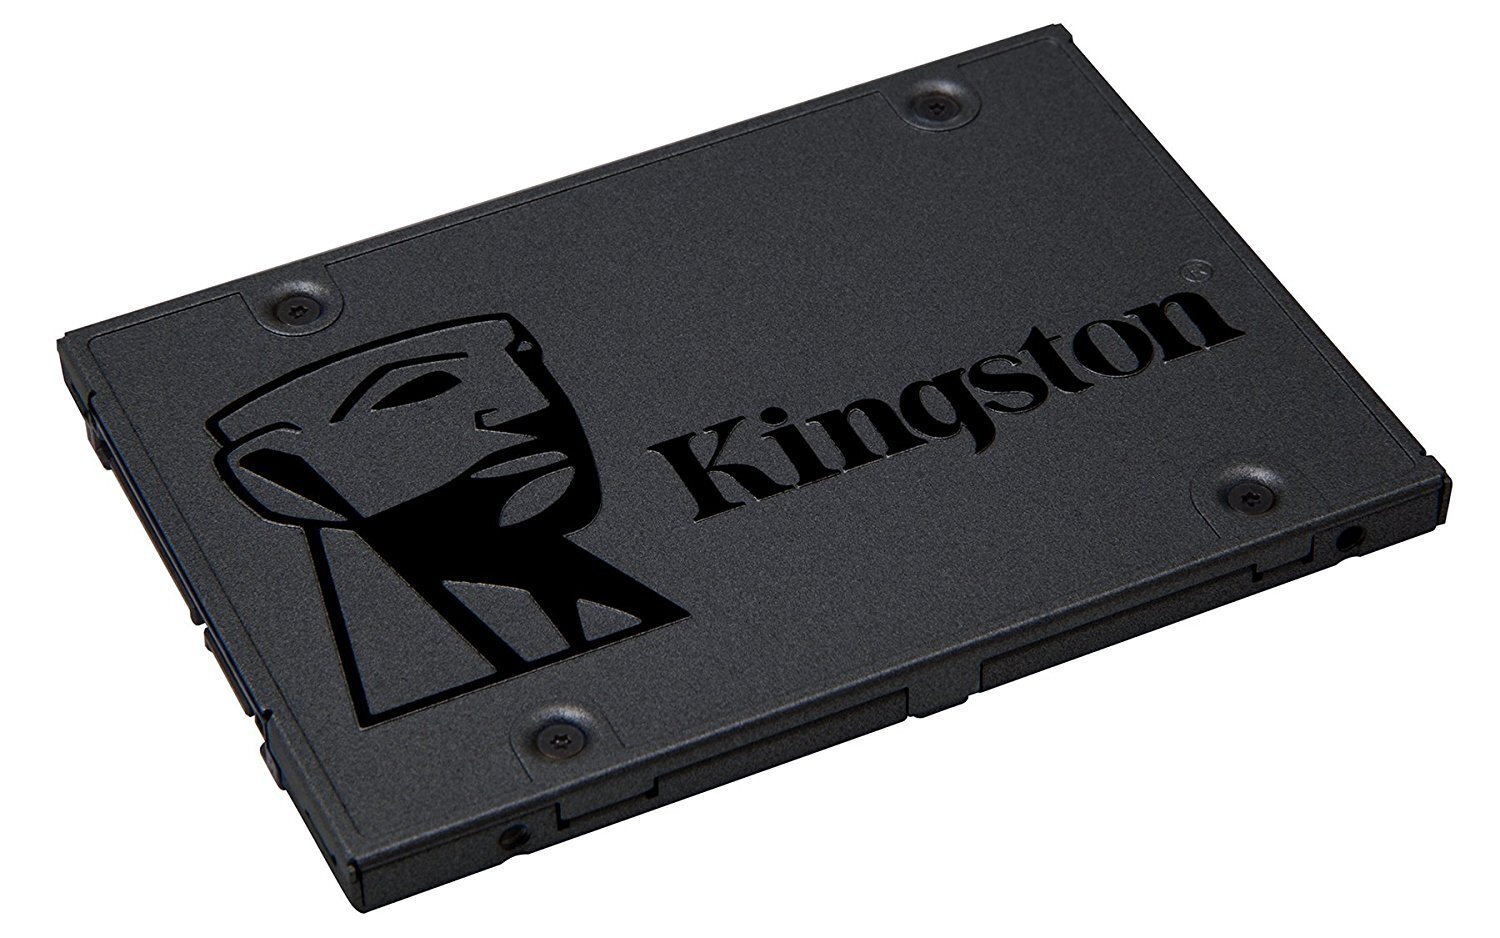 Kingston SSDNow A400 1.92TB, 2.5 inch Internal Solid State Drive (SSD) Limited 3-year warranty with free technical support (SA400S37/1920G)